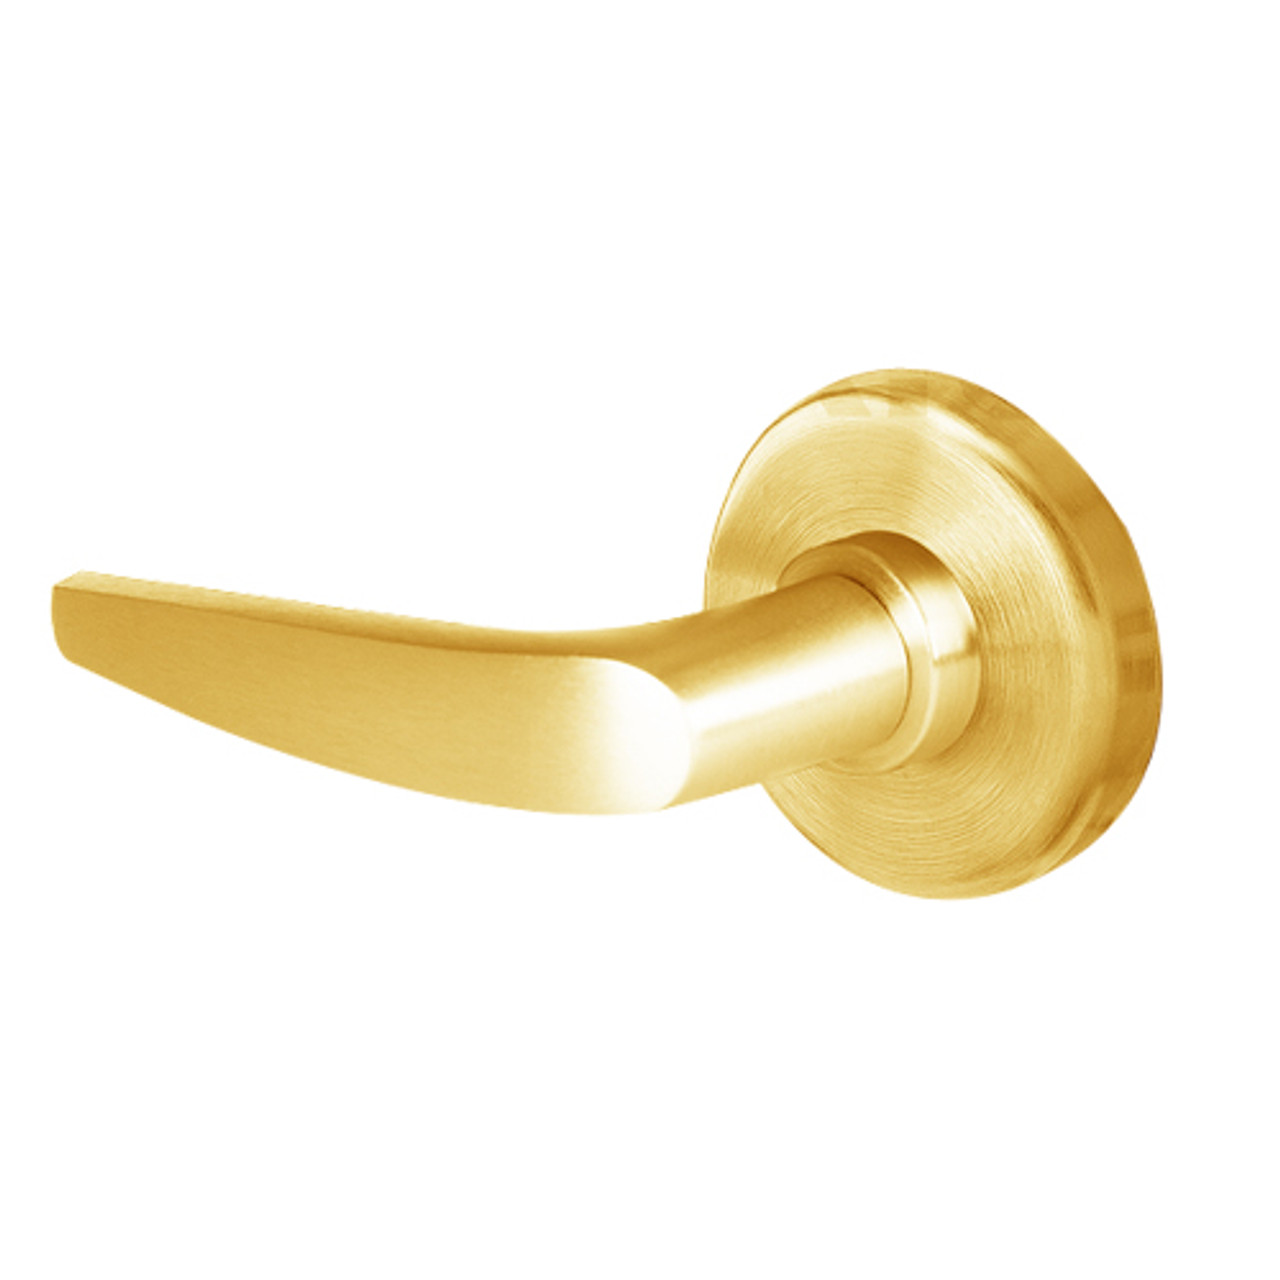 45H0LT16H605 Best 40H Series Privacy Heavy Duty Mortise Lever Lock with Curved with No Return in Bright Brass